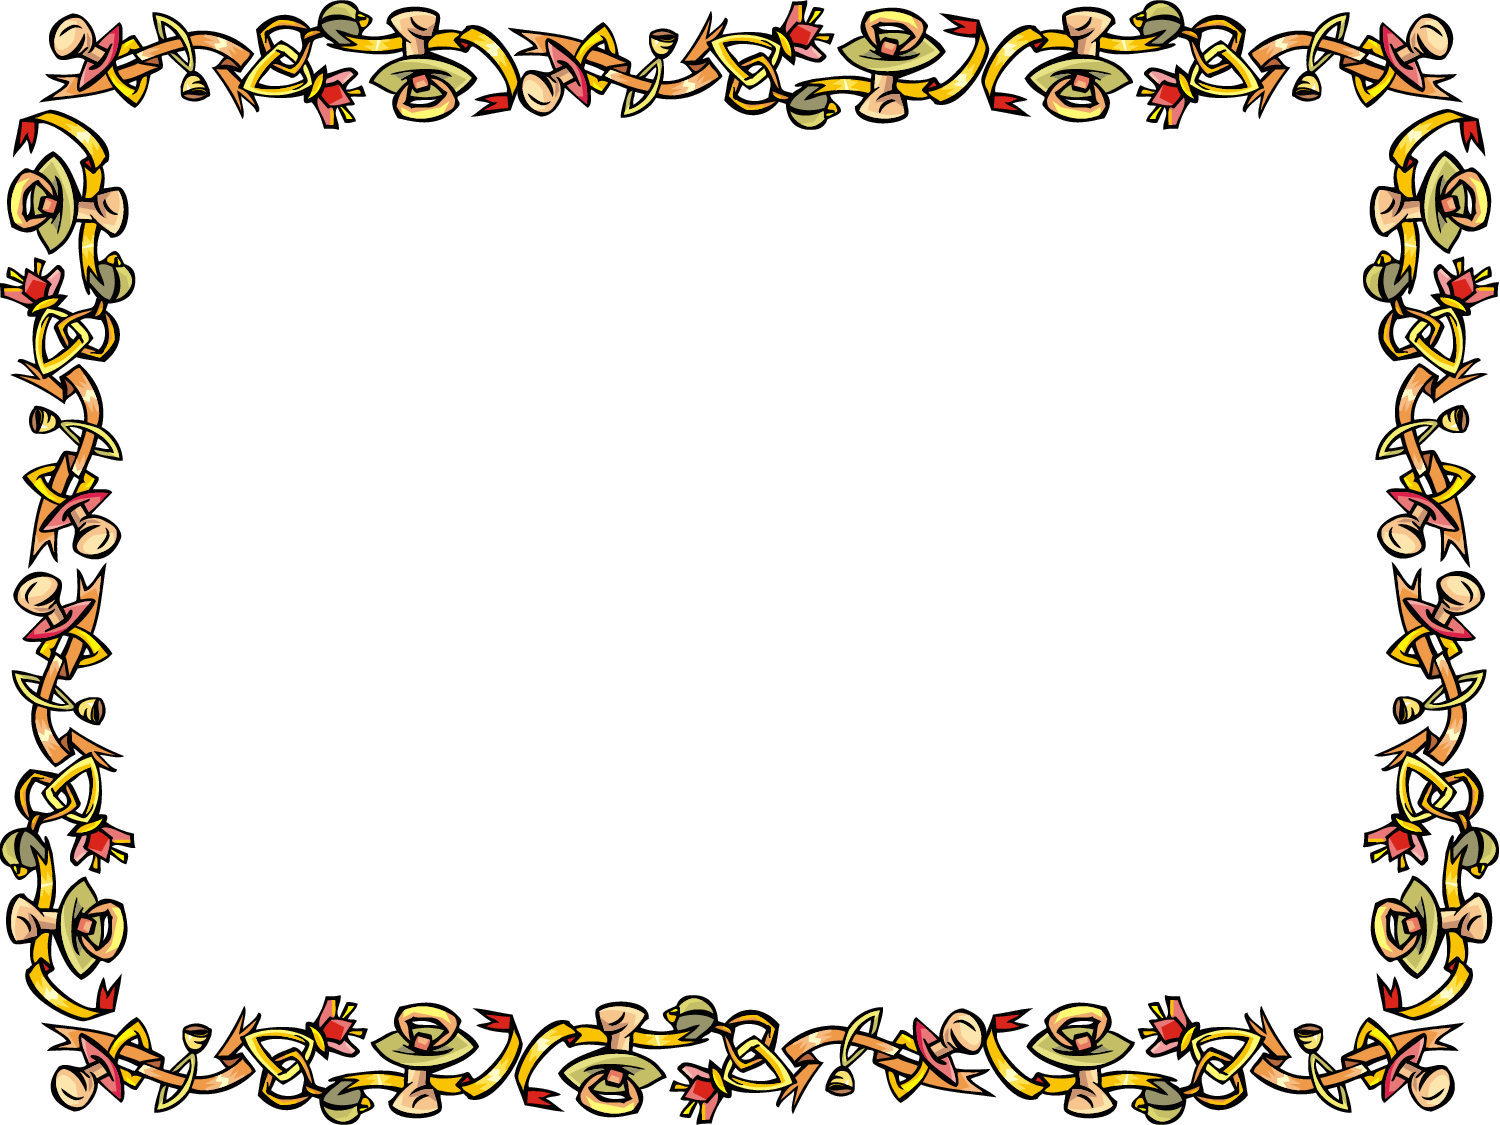 free-border-templates-clipart-best